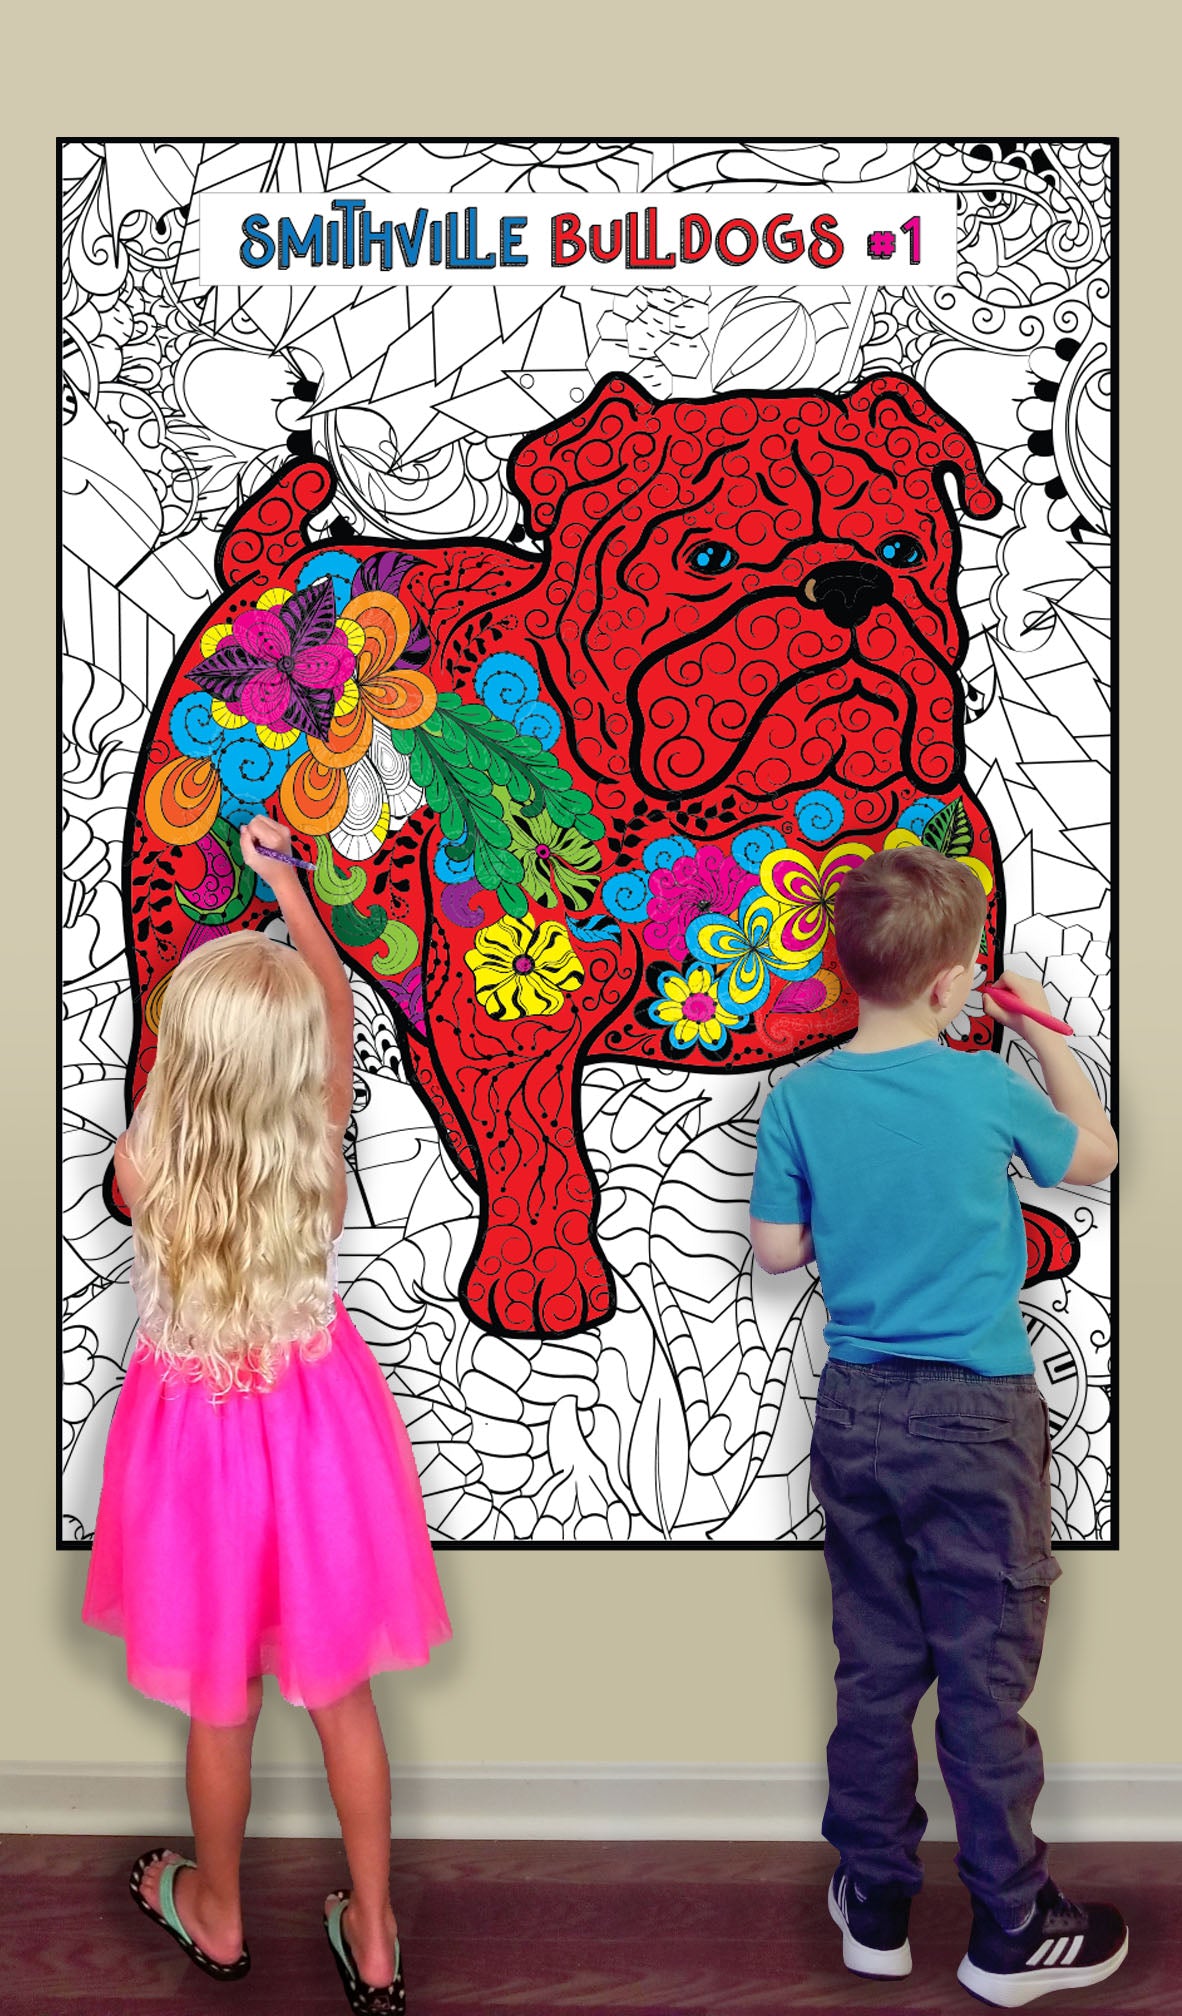 Bulldog Personalized Giant Coloring Poster 46"x60"